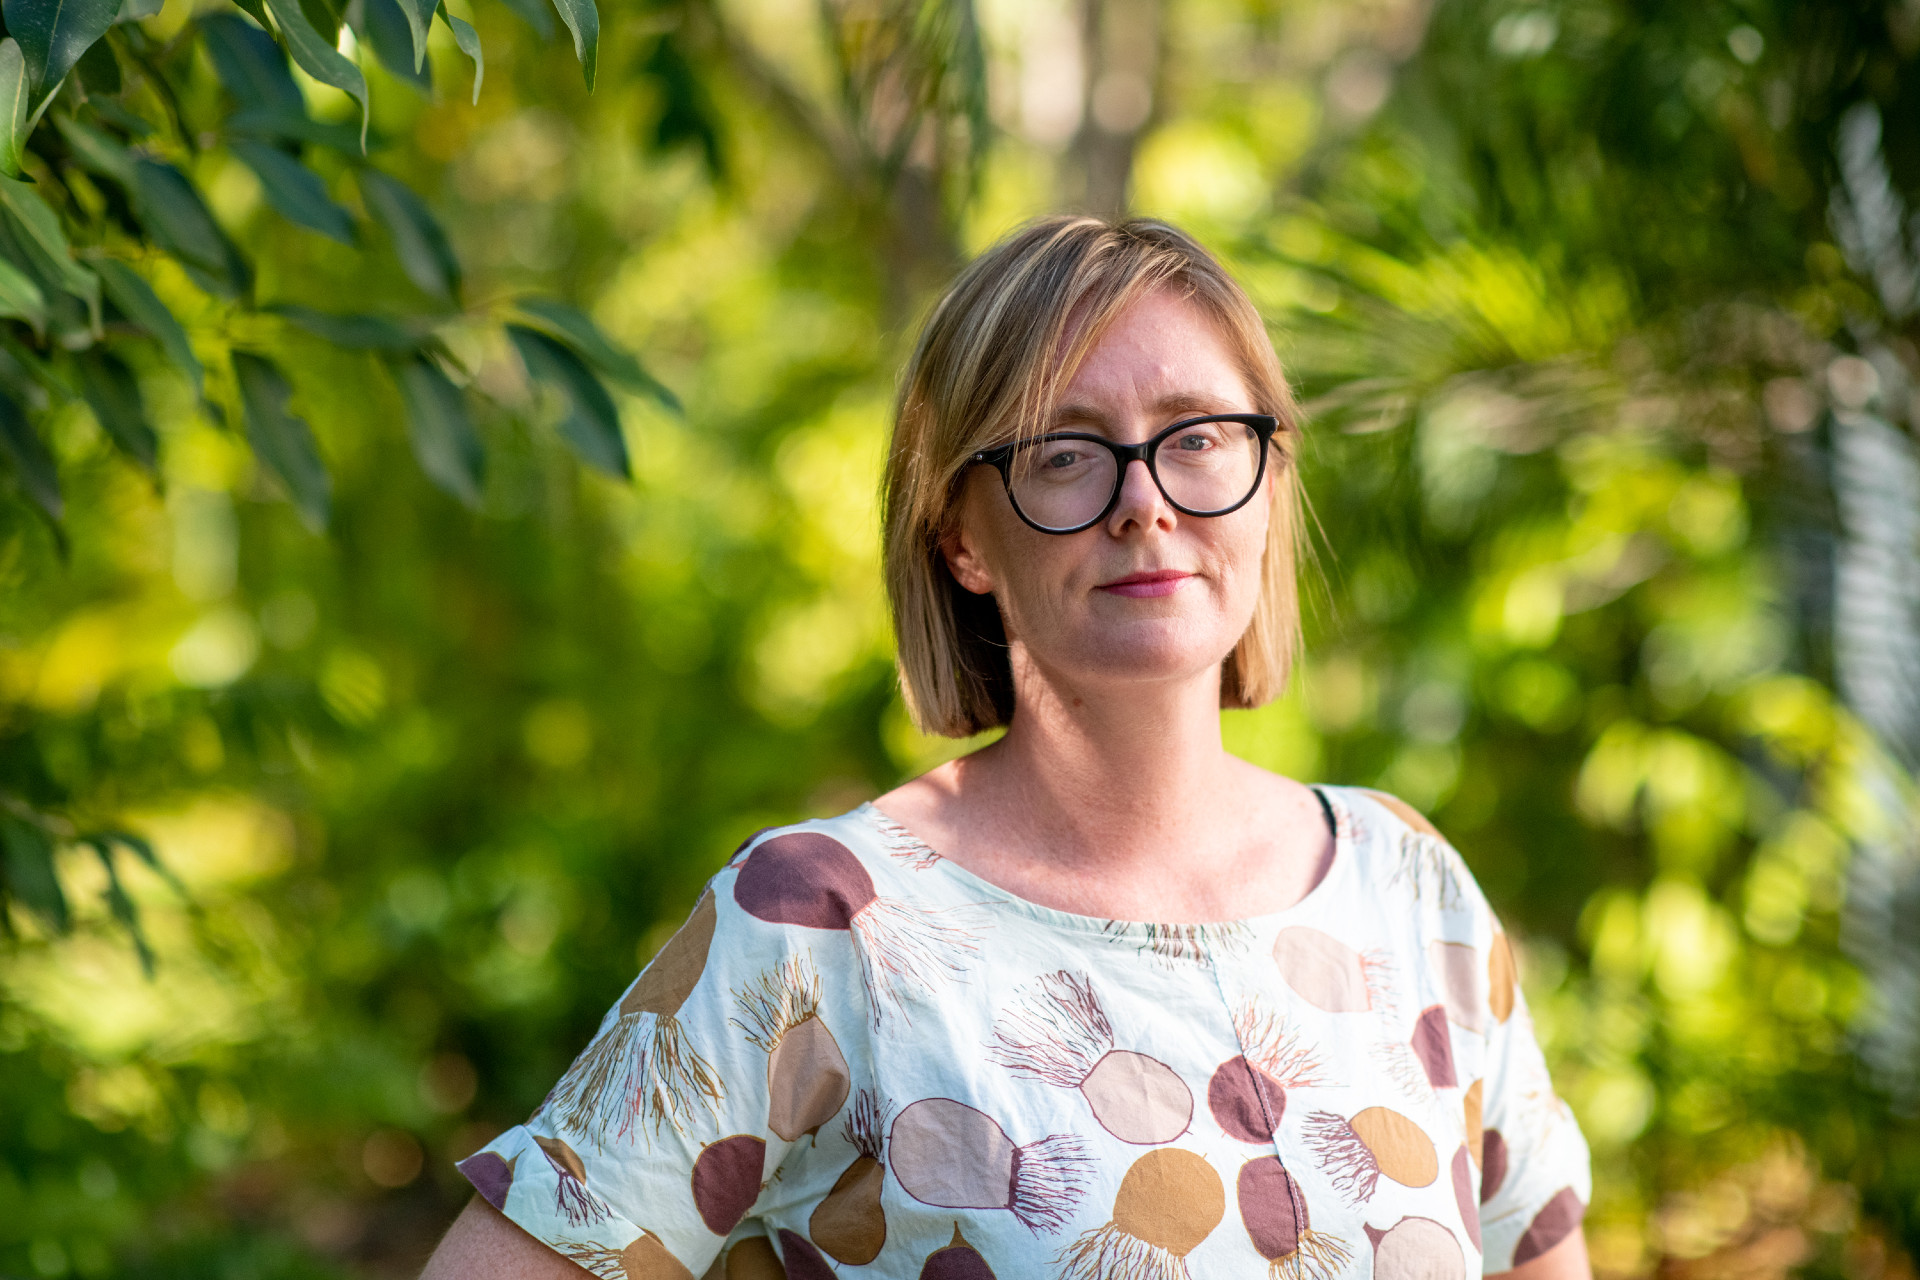 A woman wearing glasses stands in a leafy Darwin backyard, looking slightly concerned.